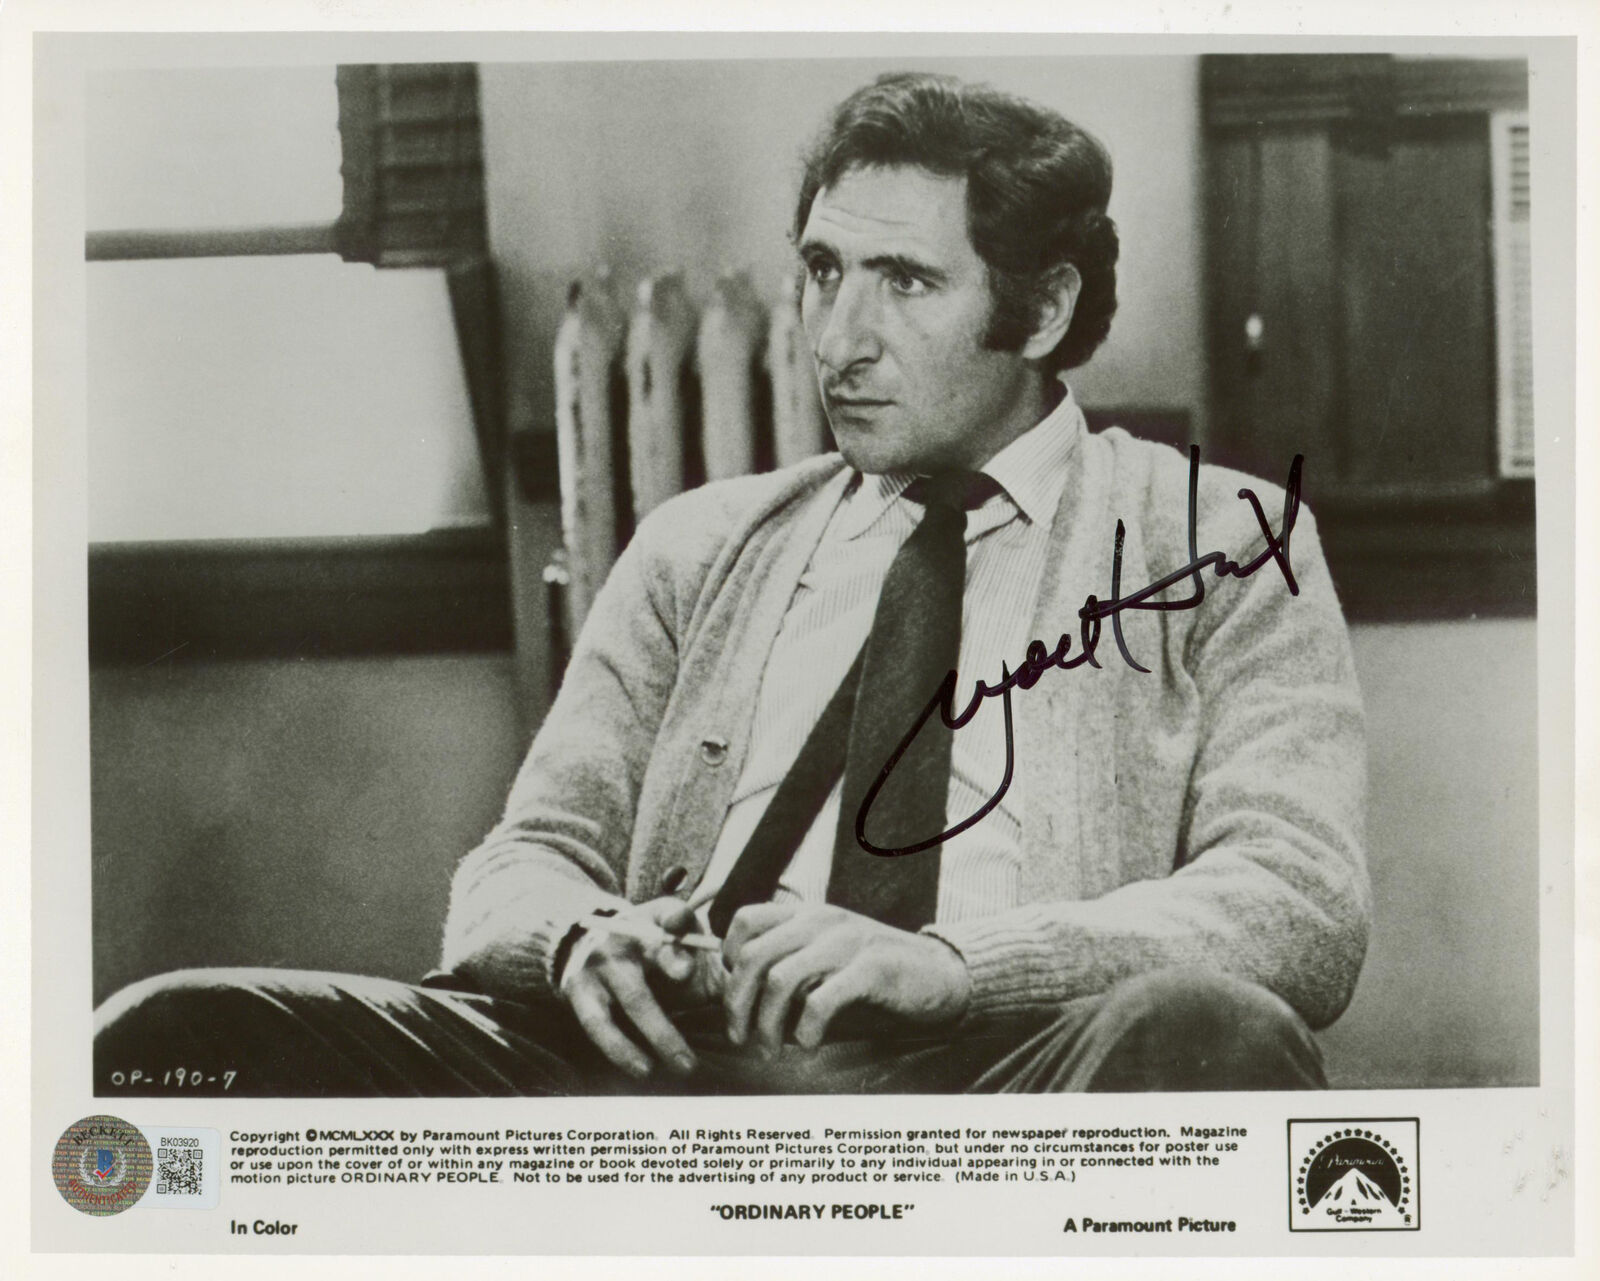 Judd Hirsch Ordinary People Authentic Signed 8x10 Photo Autographed BAS #BK03920